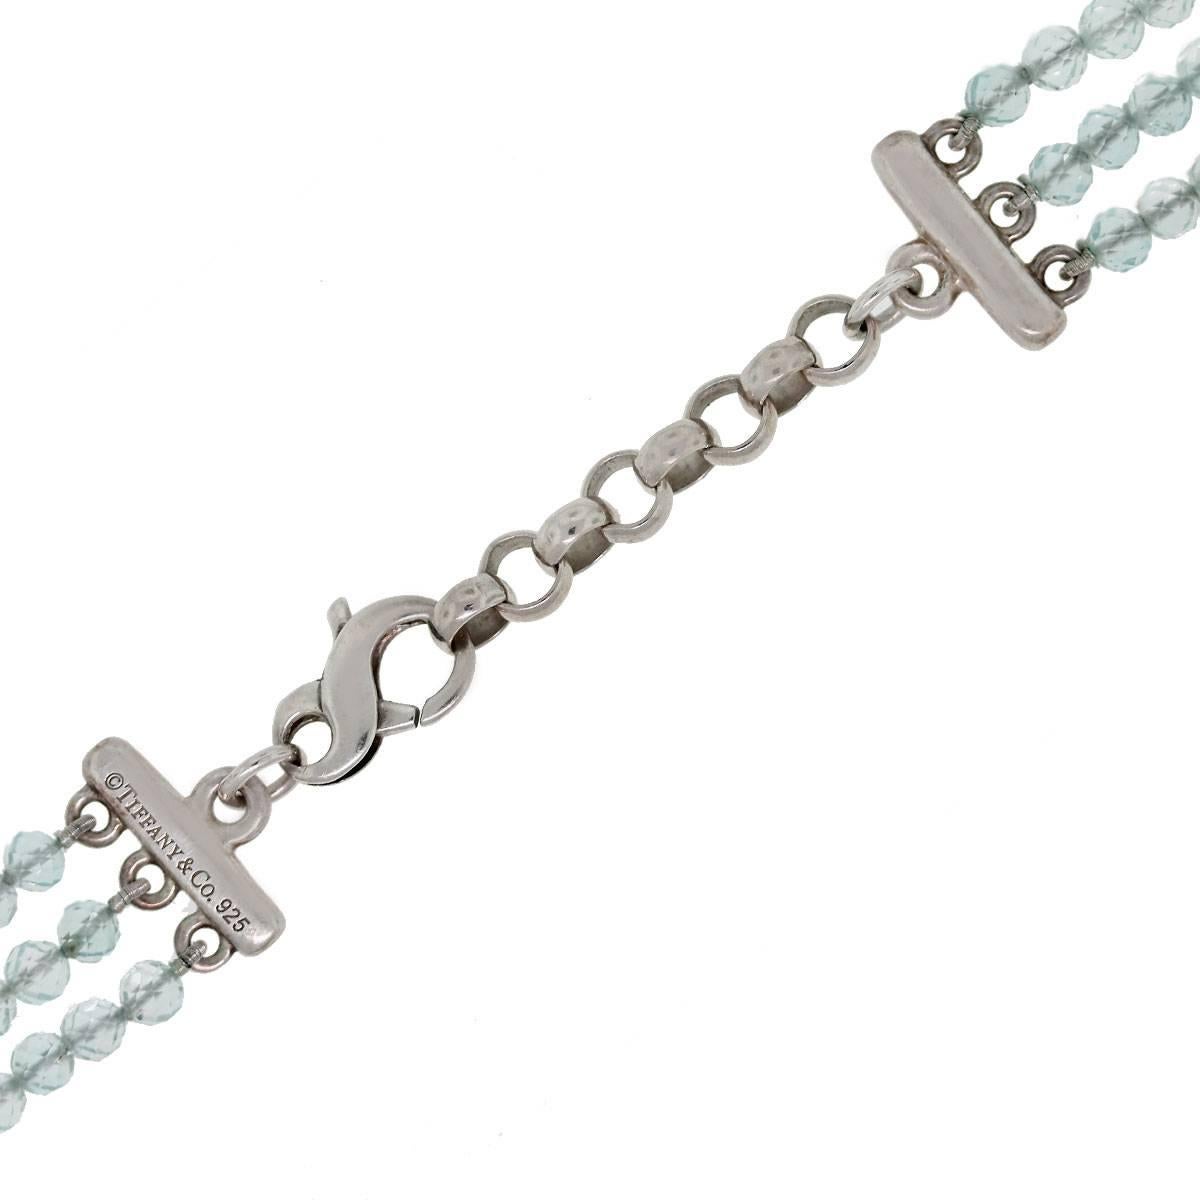 Designer:	Tiffany & Co.
Style: Faceted Bead Necklace
Material: Sterling Silver
Semi-Precious Gemstone: 3 Rows of 4.12mm Faceted Aquamarine Beads (Total 321)
Necklace Measurement: 	Adjustable from 17.5